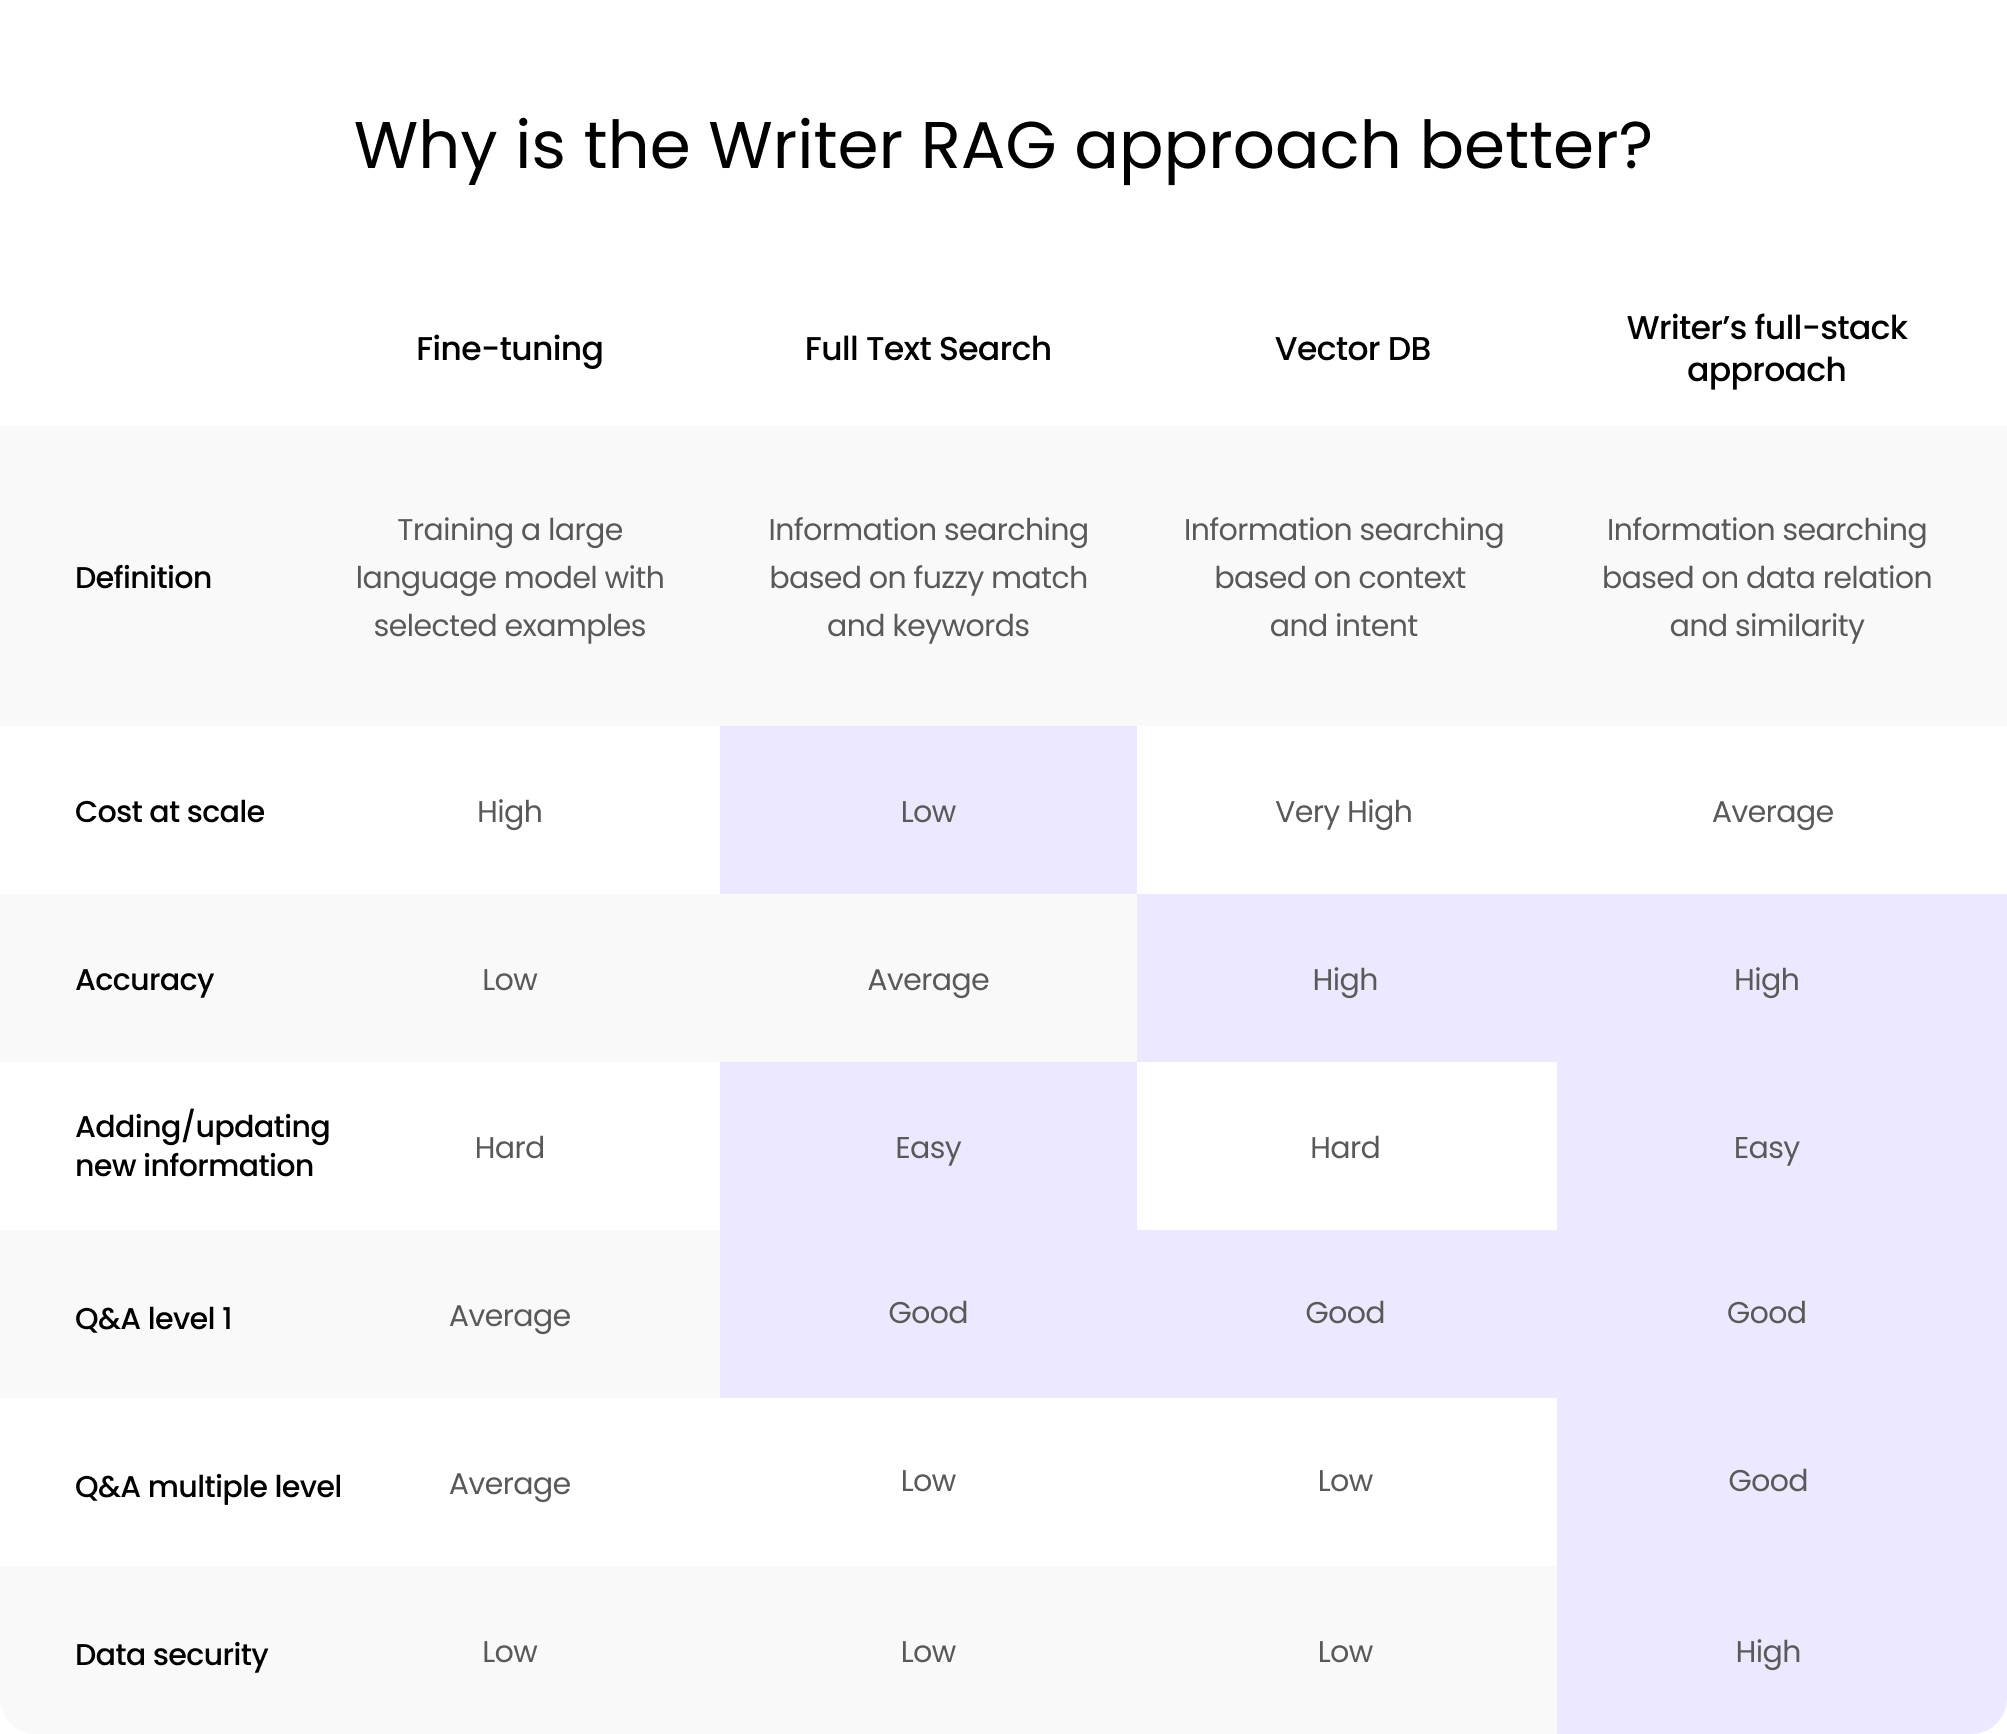 A table entitled "Why is the Writer RAG approach better?" Demonstrates complexity involved with various RAG approaches compared to the Writer approach. 